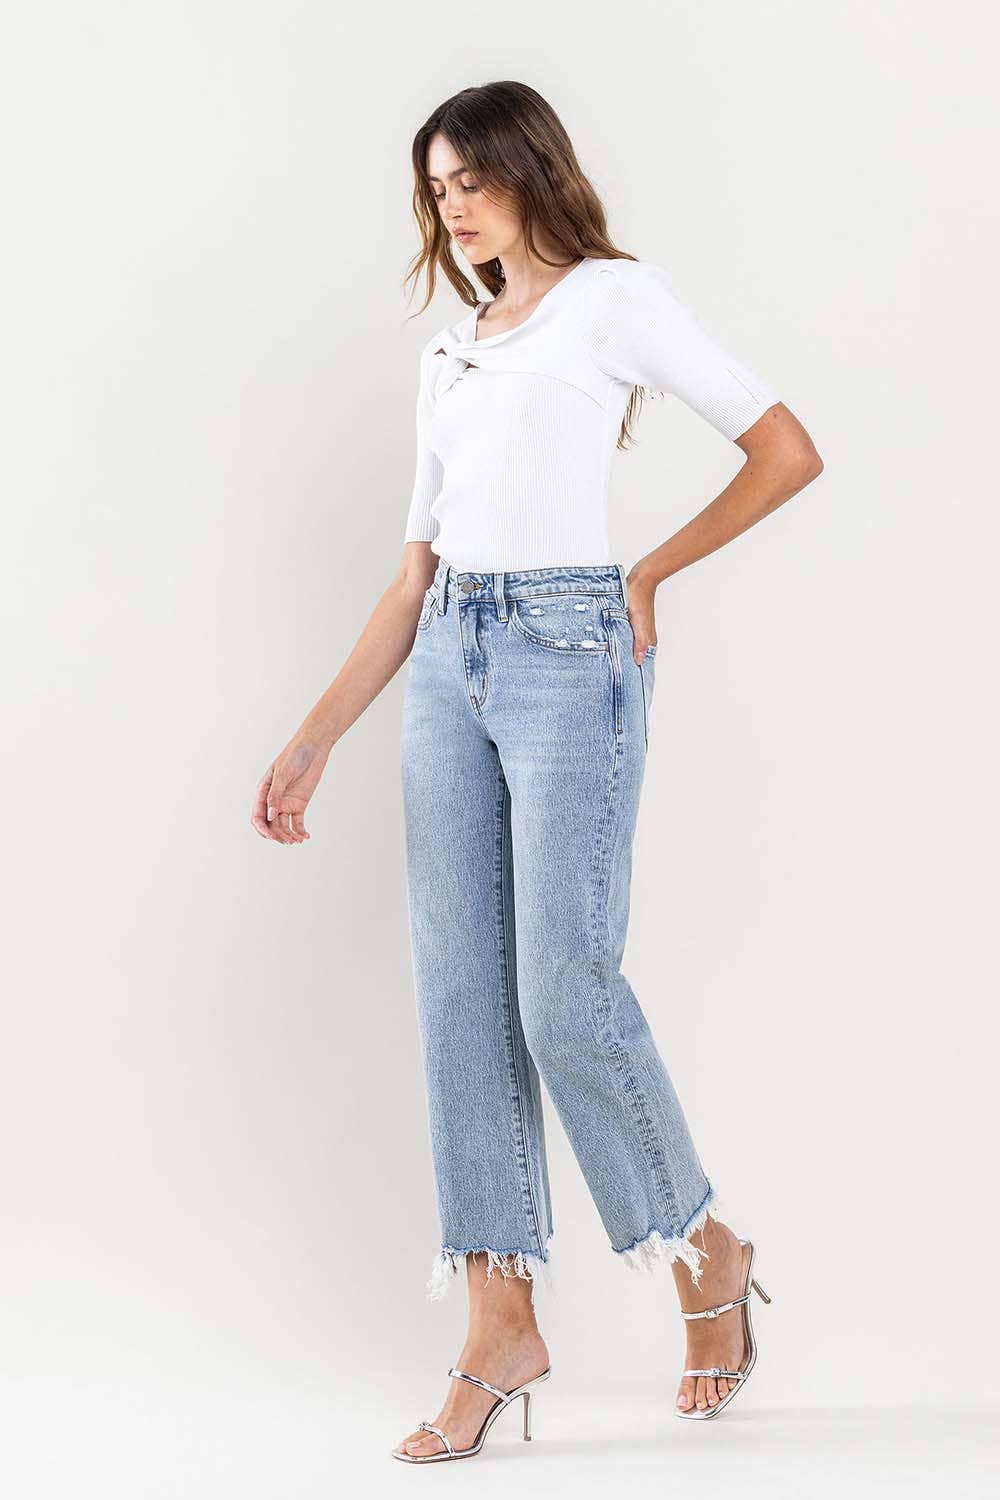 HIGH RISE CROPPED DISTRESSED HEM DAD JEAN - Lake City Boutique